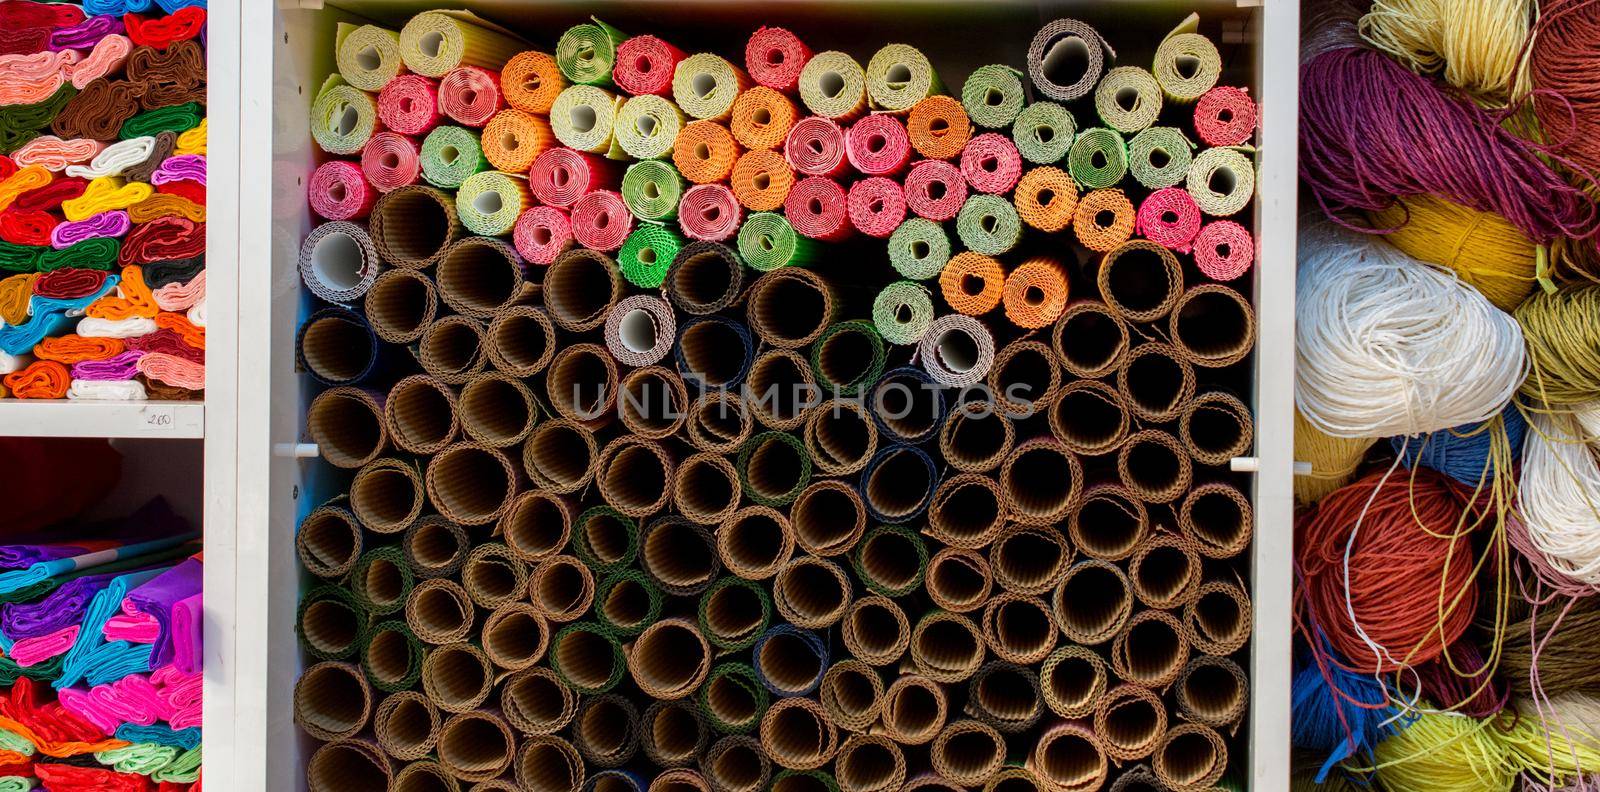 Dozens of colorful paper rolls in display by berkay